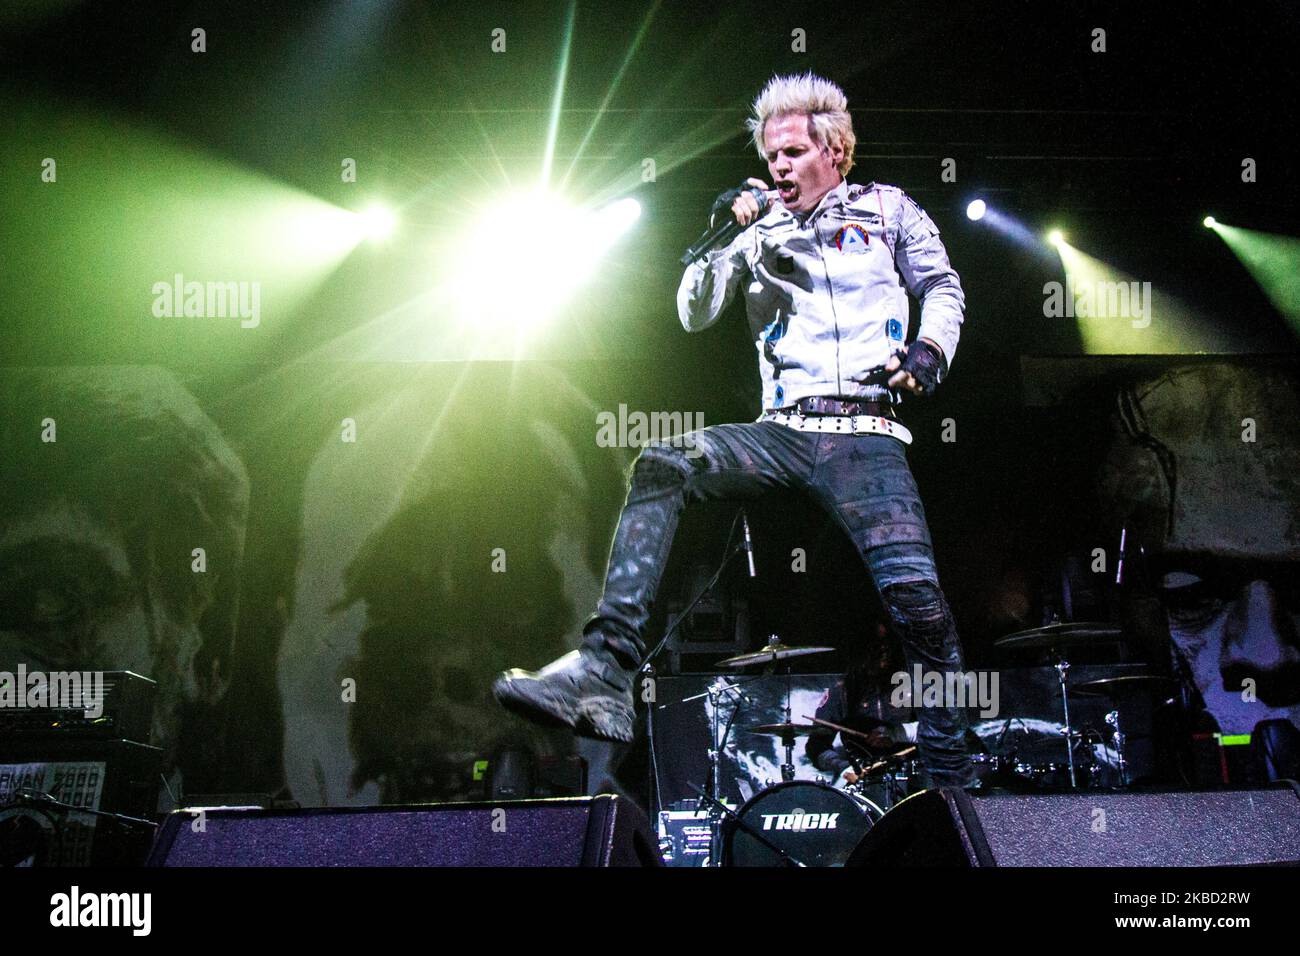 Spider one of Powerman 5000 performs live in Milano, Italy, on June 27 2014. Powerman 5000, which frontman Spider One is the younger brother of fellow metal musician Rob Zombie, is an American Industrial metal band formed in 1991. The group has released nine albums, gaining its highest level of commercial success with 1999's Tonight the Stars Revolt!, which reached number 29 on the Billboard 200 while spawning the singles When Worlds Collide and Nobody's Real (Photo by Mairo Cinquetti/NurPhoto) Stock Photo